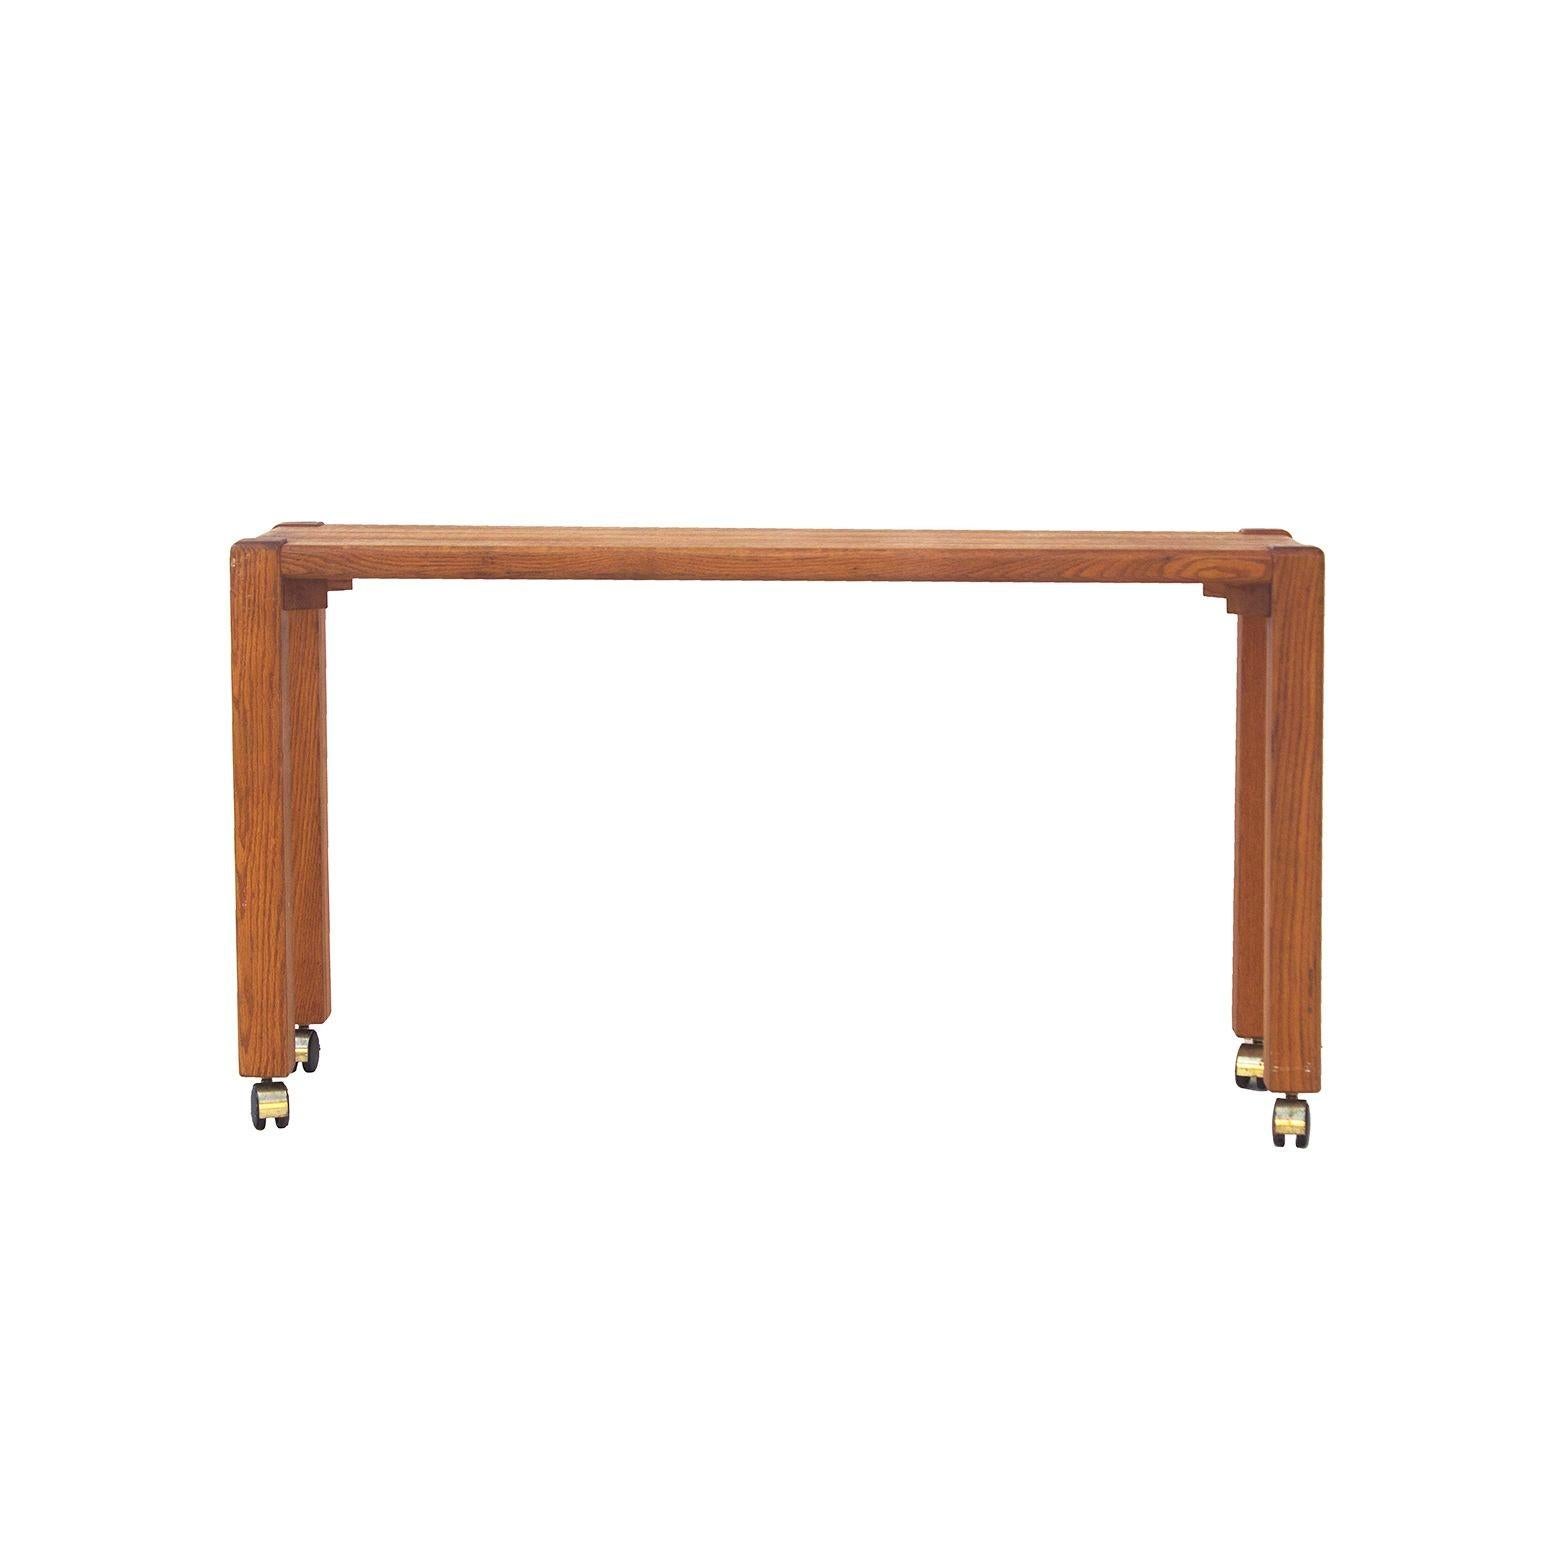 USA, 1970s
Handmade solid oak console table with interesting joinery features. Chunky legs at each of four corners offer visual interest. Currently on casters, which could be removed for a more organic look. Slimmer than most consoles at only 14.25